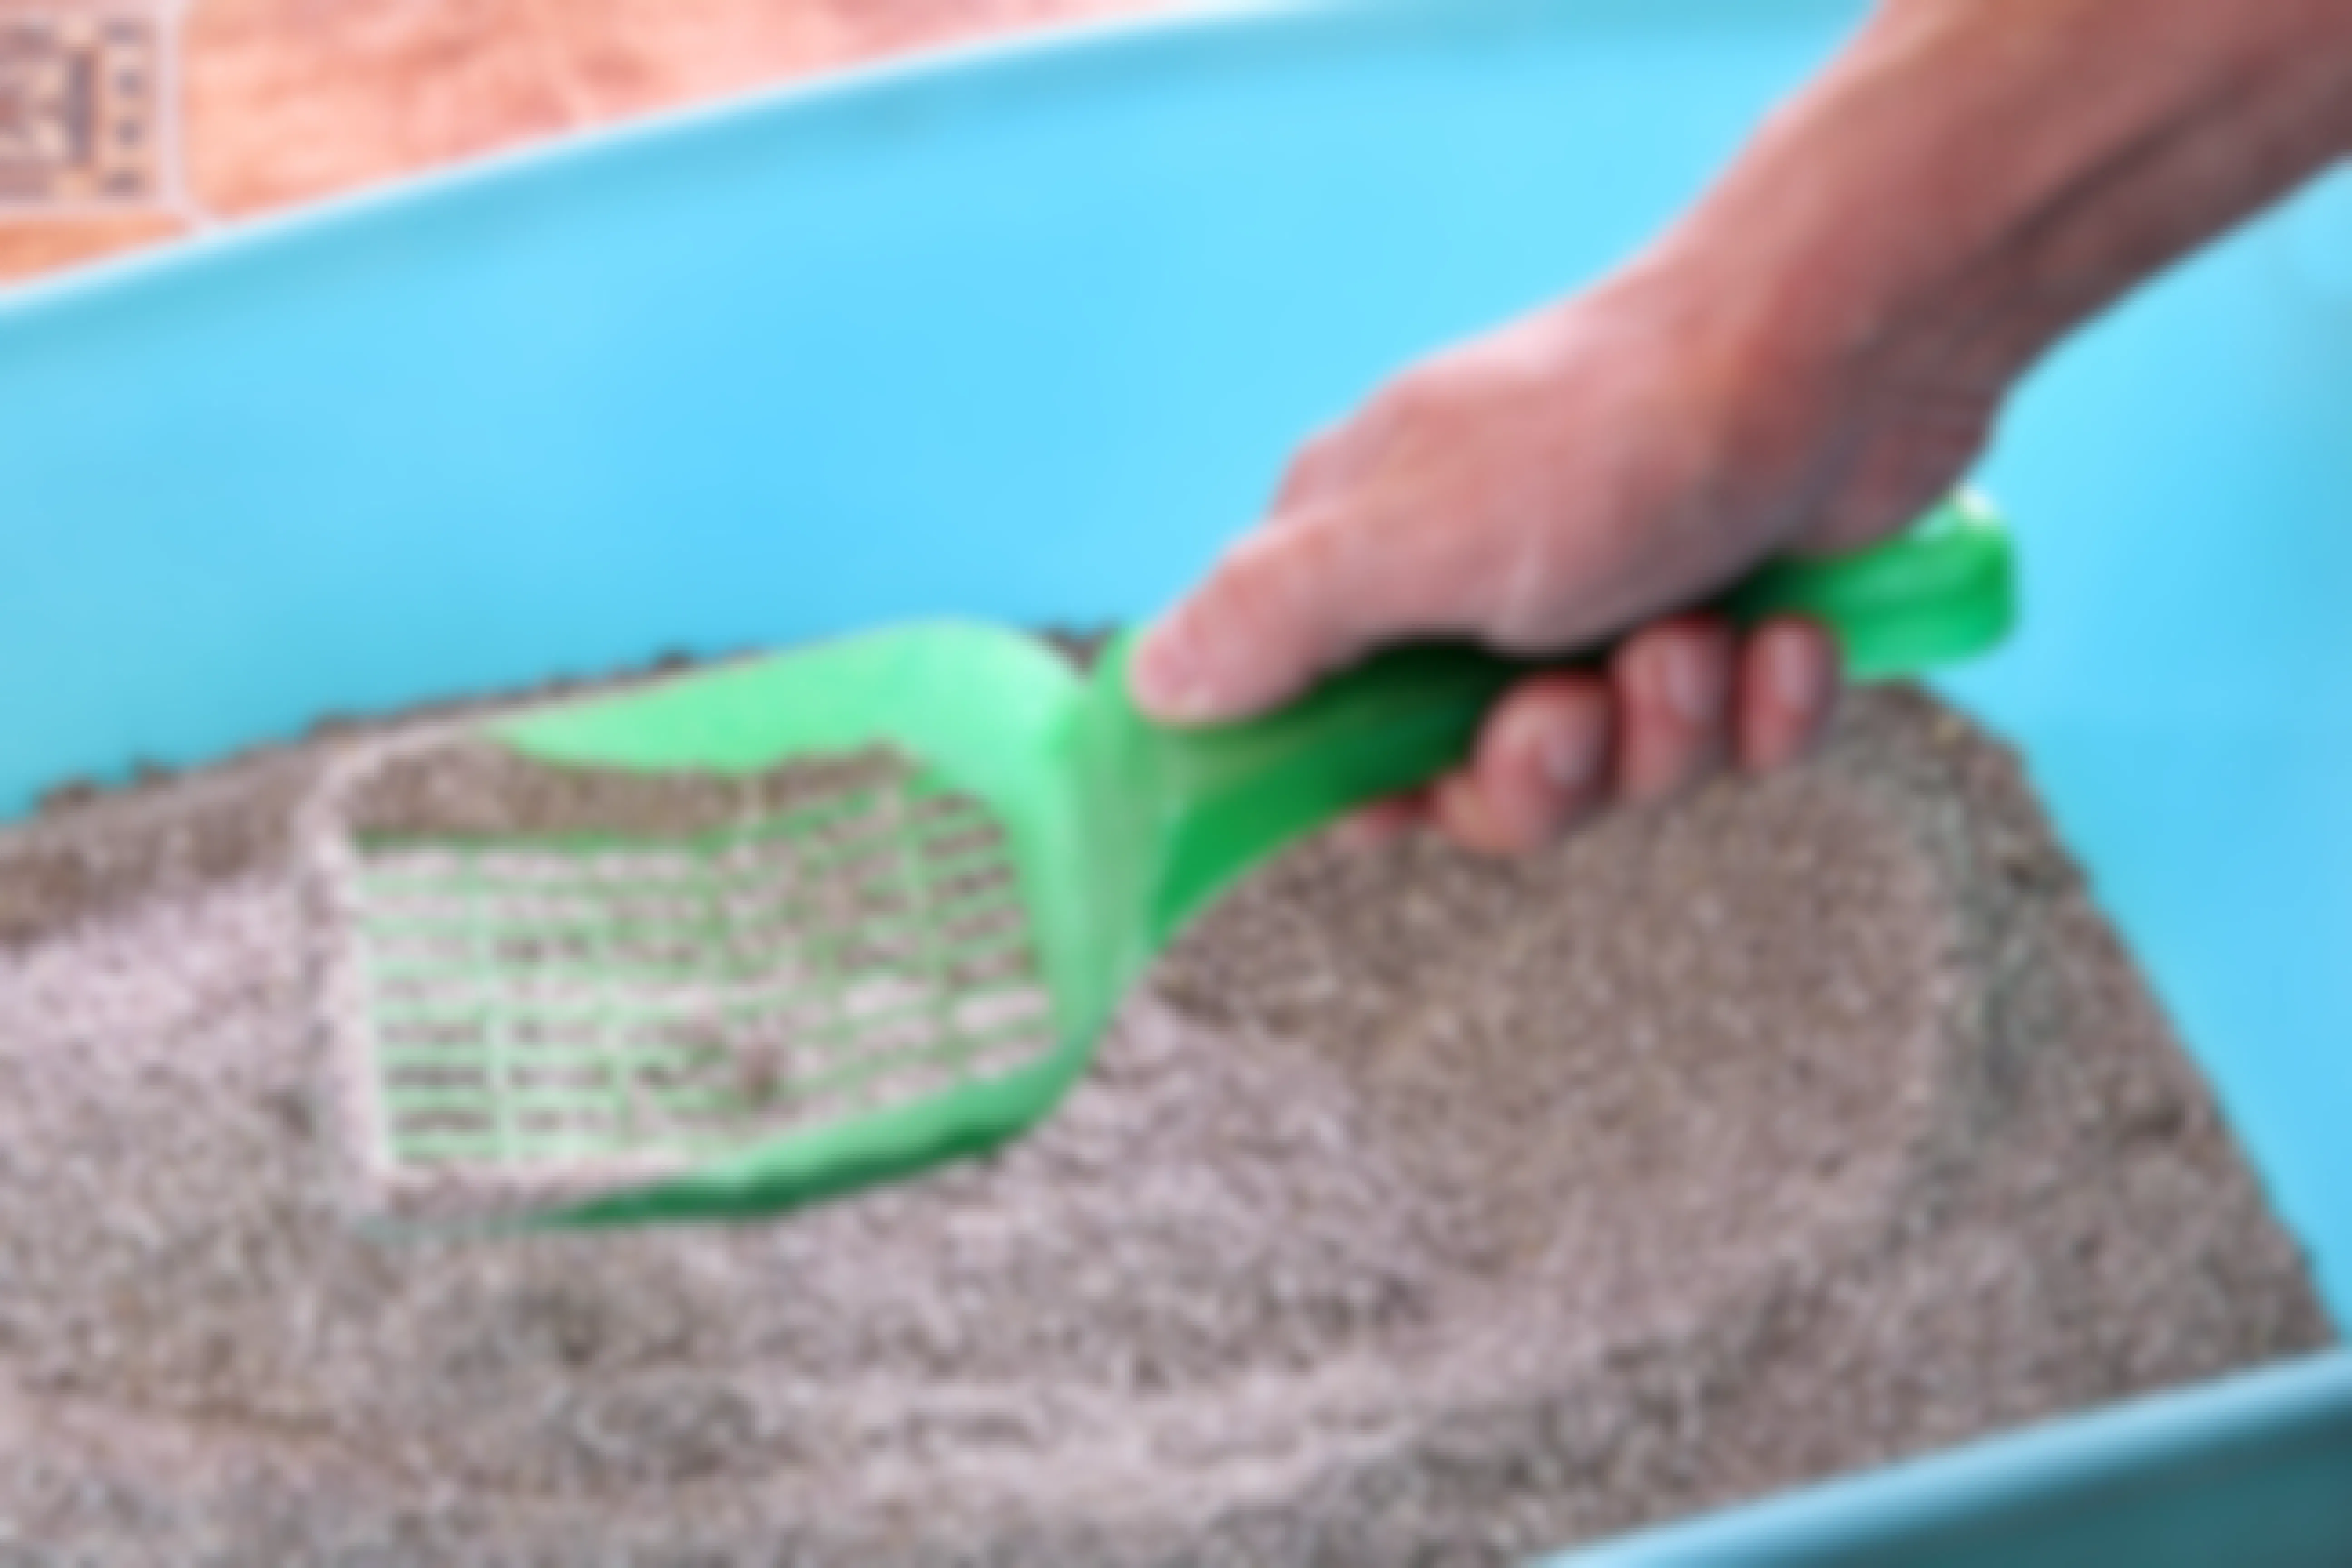 A person using a scoop inside a box of cat litter